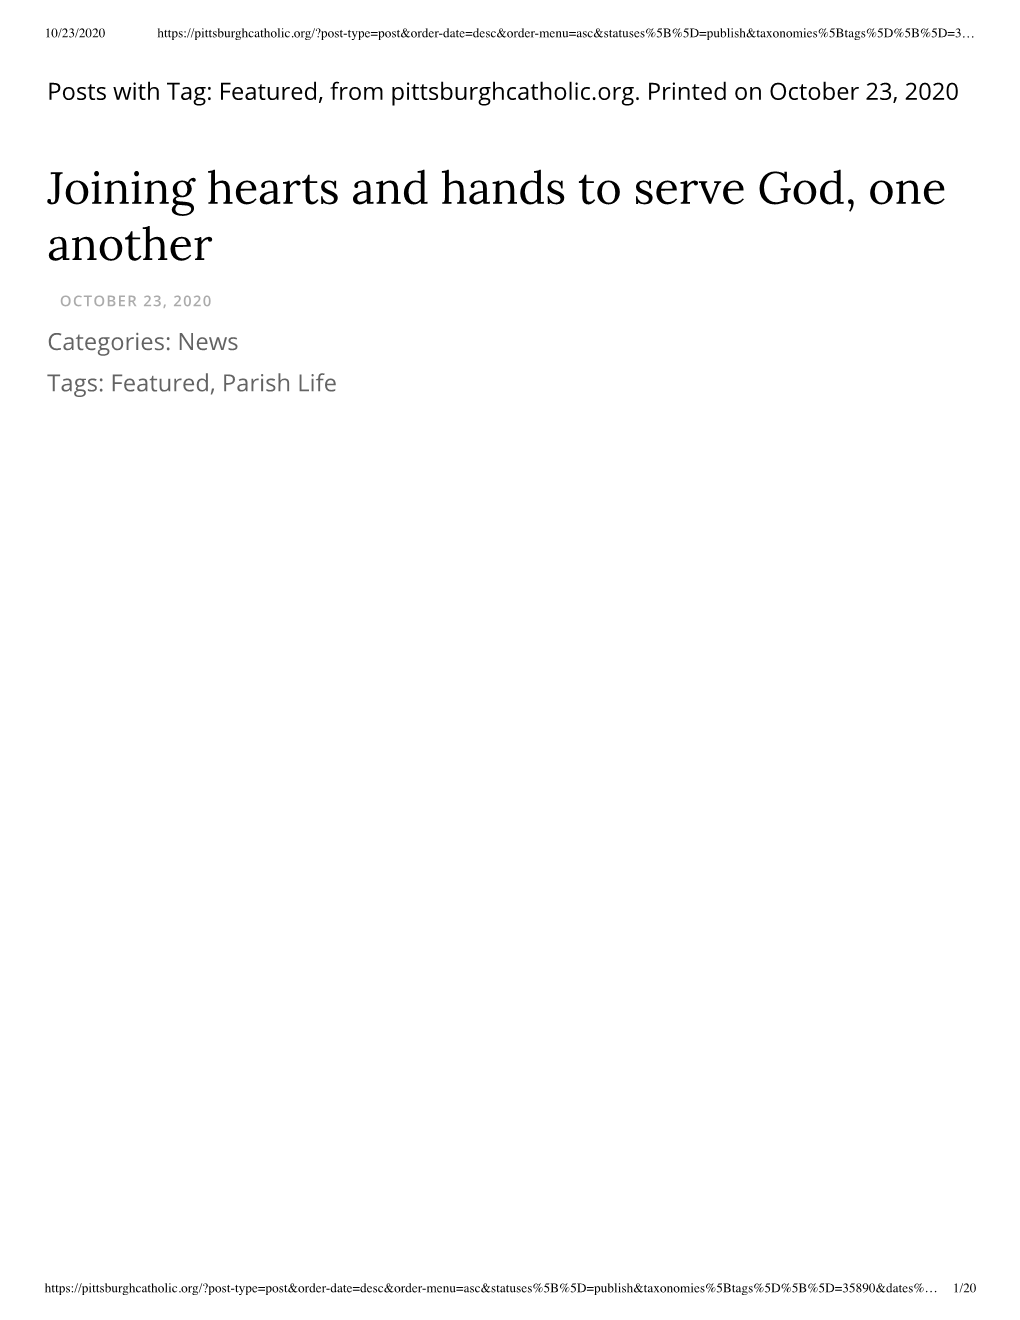 Joining Hearts and Hands to Serve God, One Another